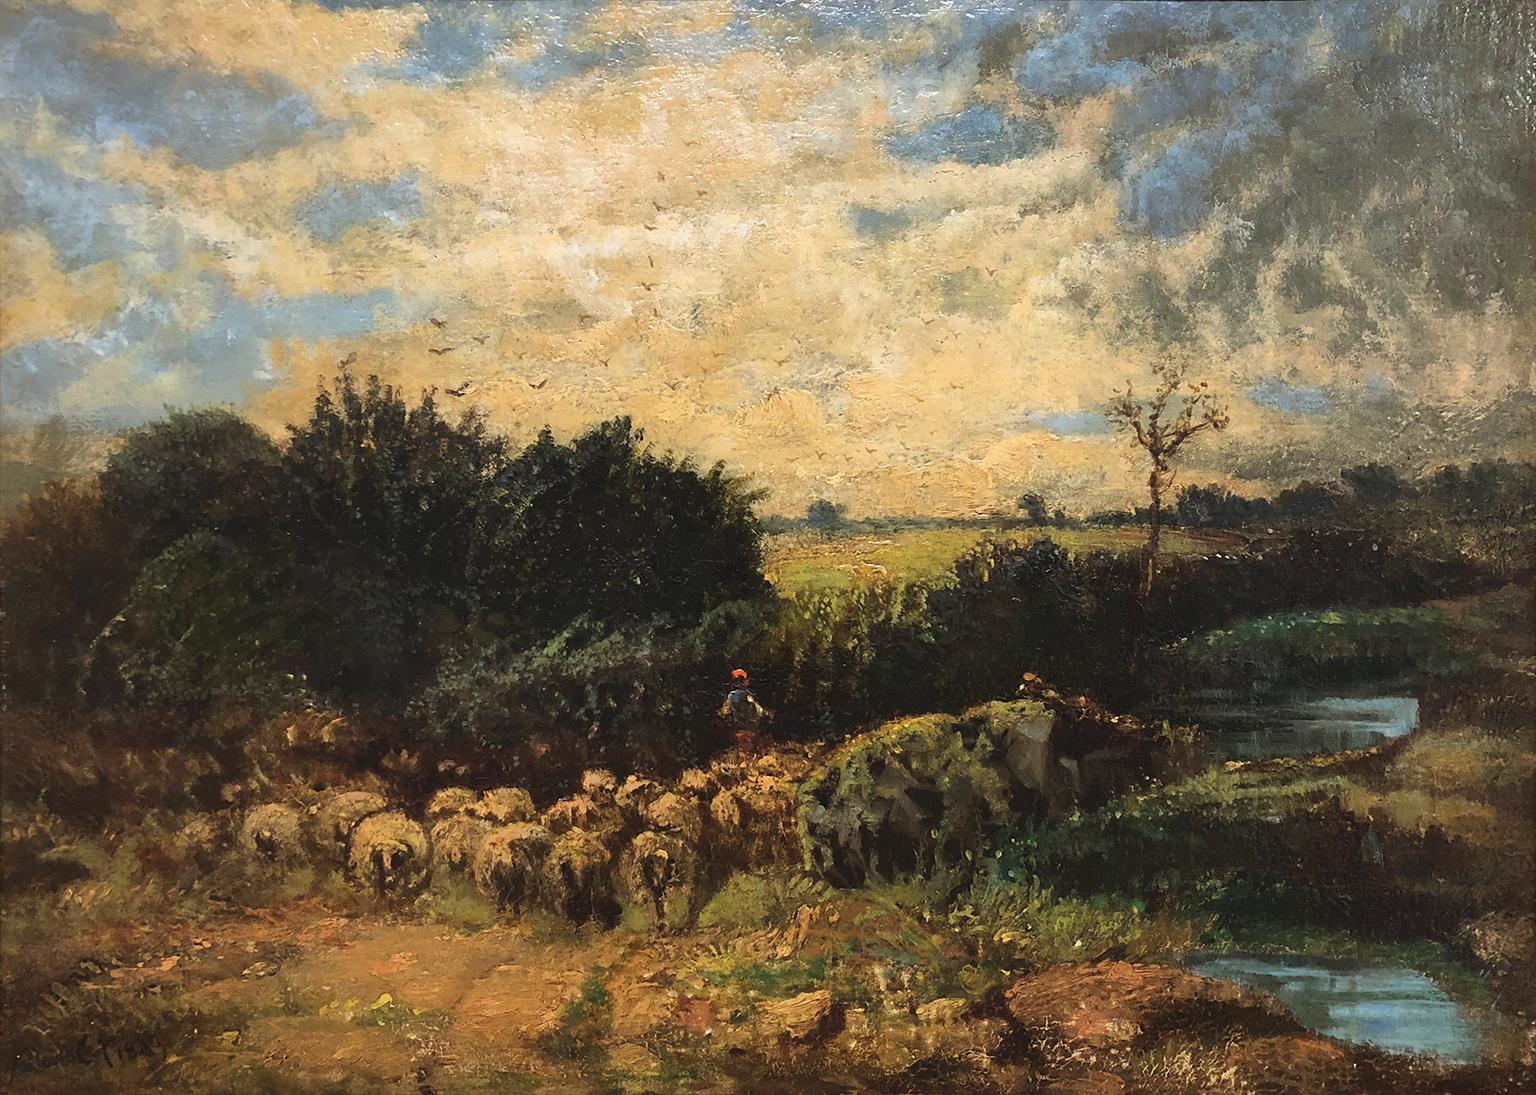 David Cox the Younger Landscape Painting - David Cox "The Younger" (1809-1885) Moving the flock - Royal Academy